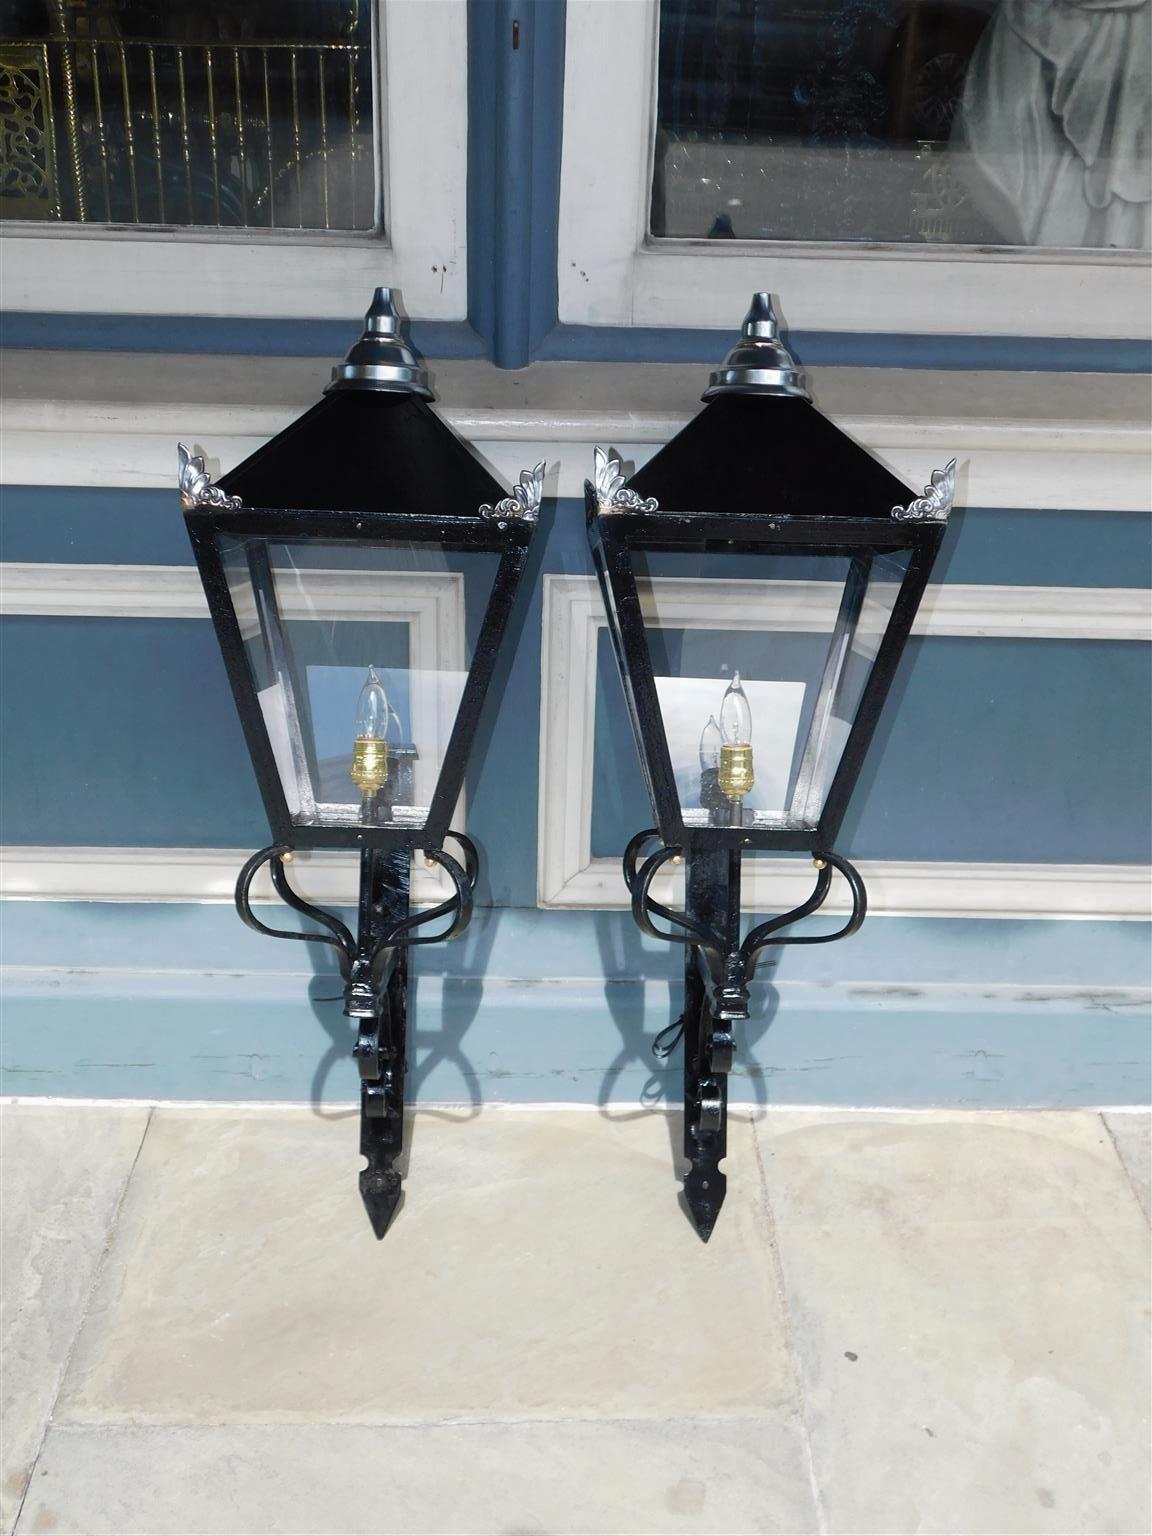 Brass Pair of American Wrought Iron and Spelter Finial Mounted Wall Lanterns, C. 1850 For Sale